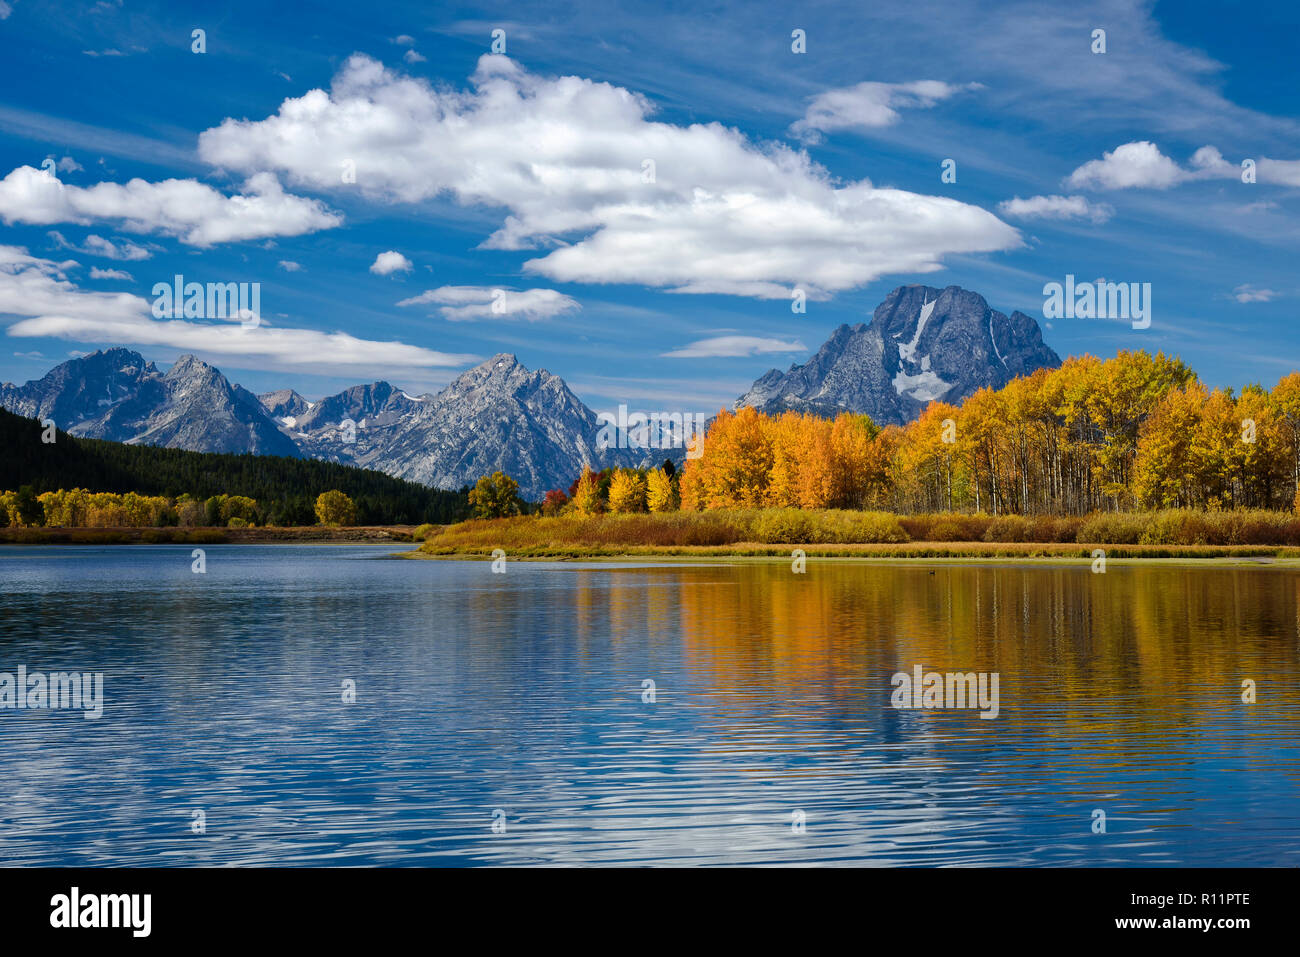 The Teton Range and Oxbow Bend on the Snake River in Grand Teton National Park, Wyoming. Stock Photo